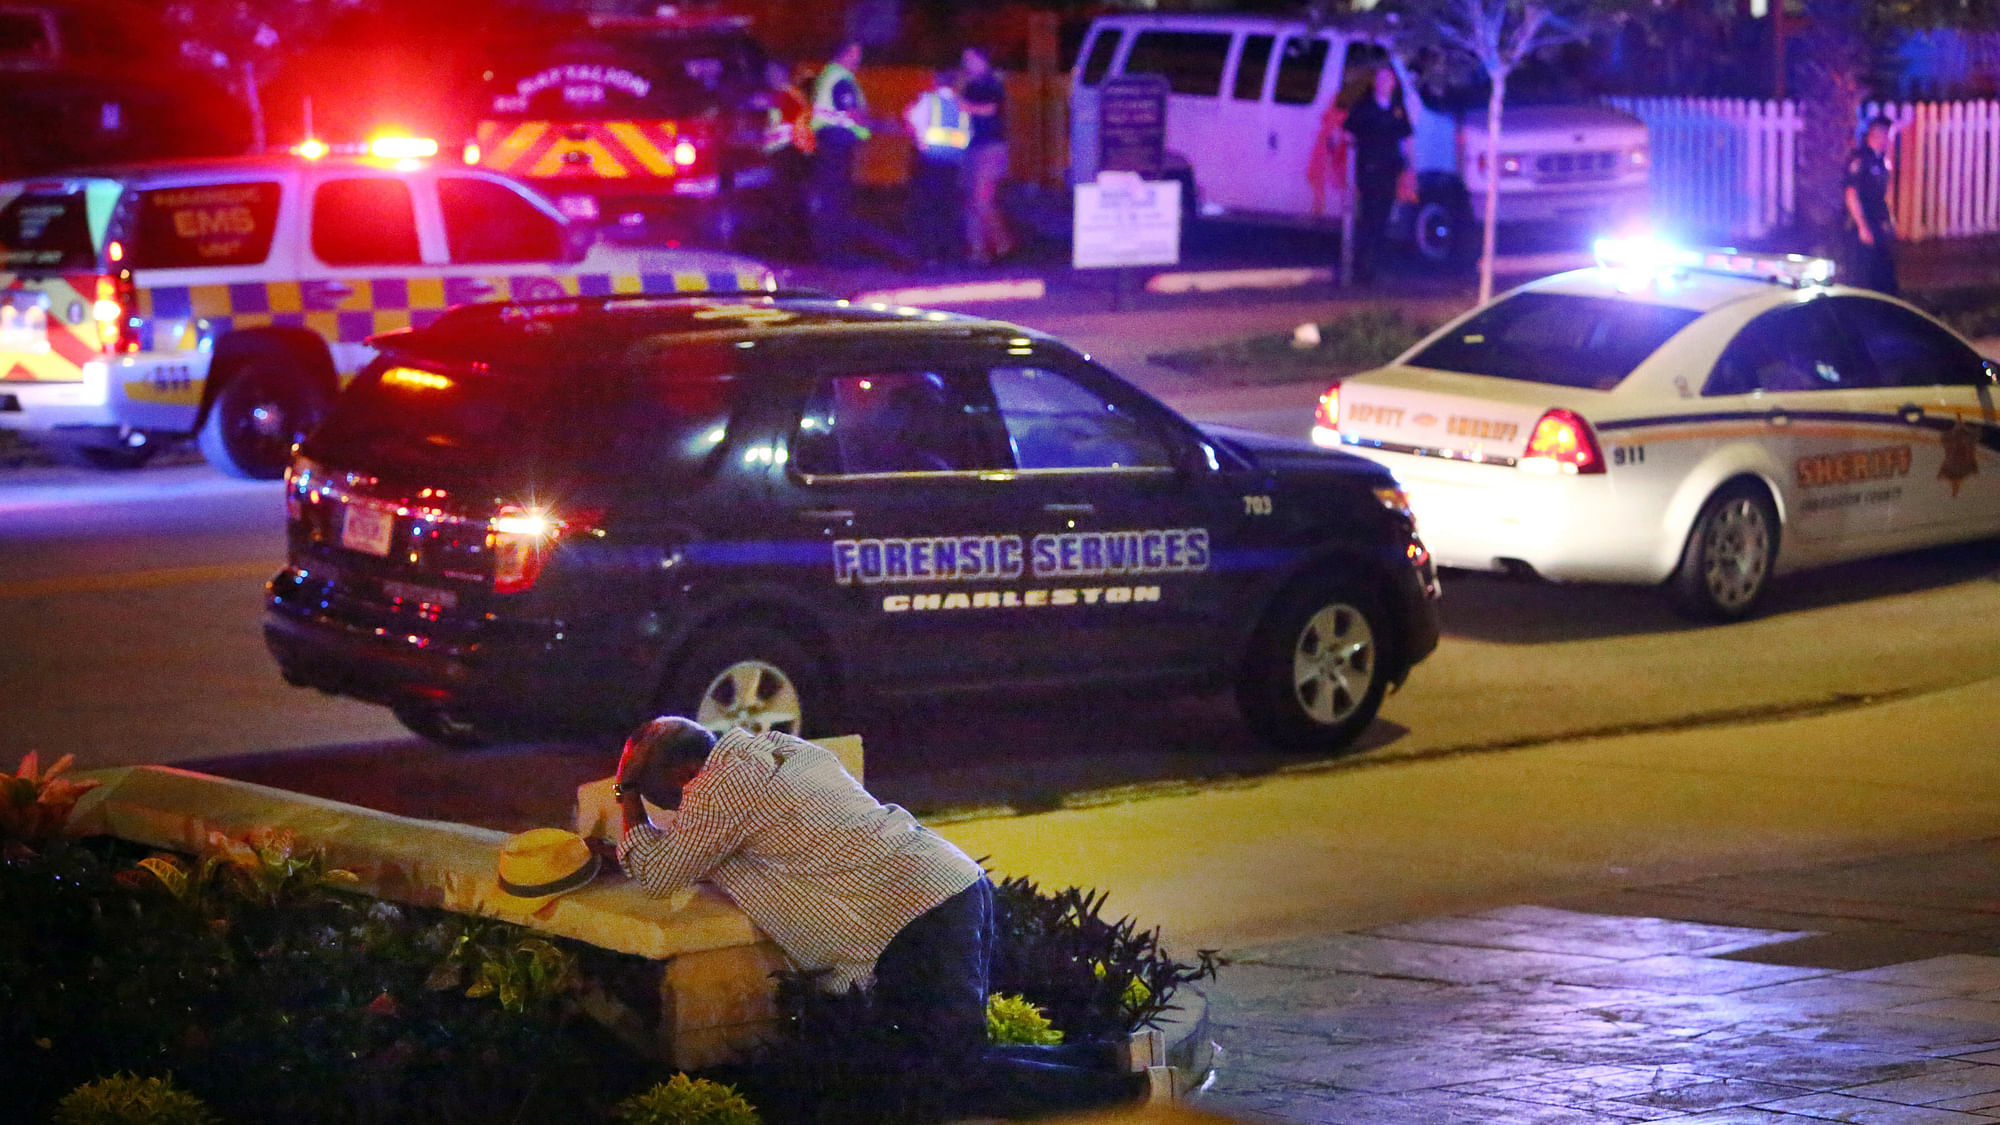 

A man kneels across the street from where police gather outside the Emanuel AME Church following a shooting on Wednesday. (Photo: AP)